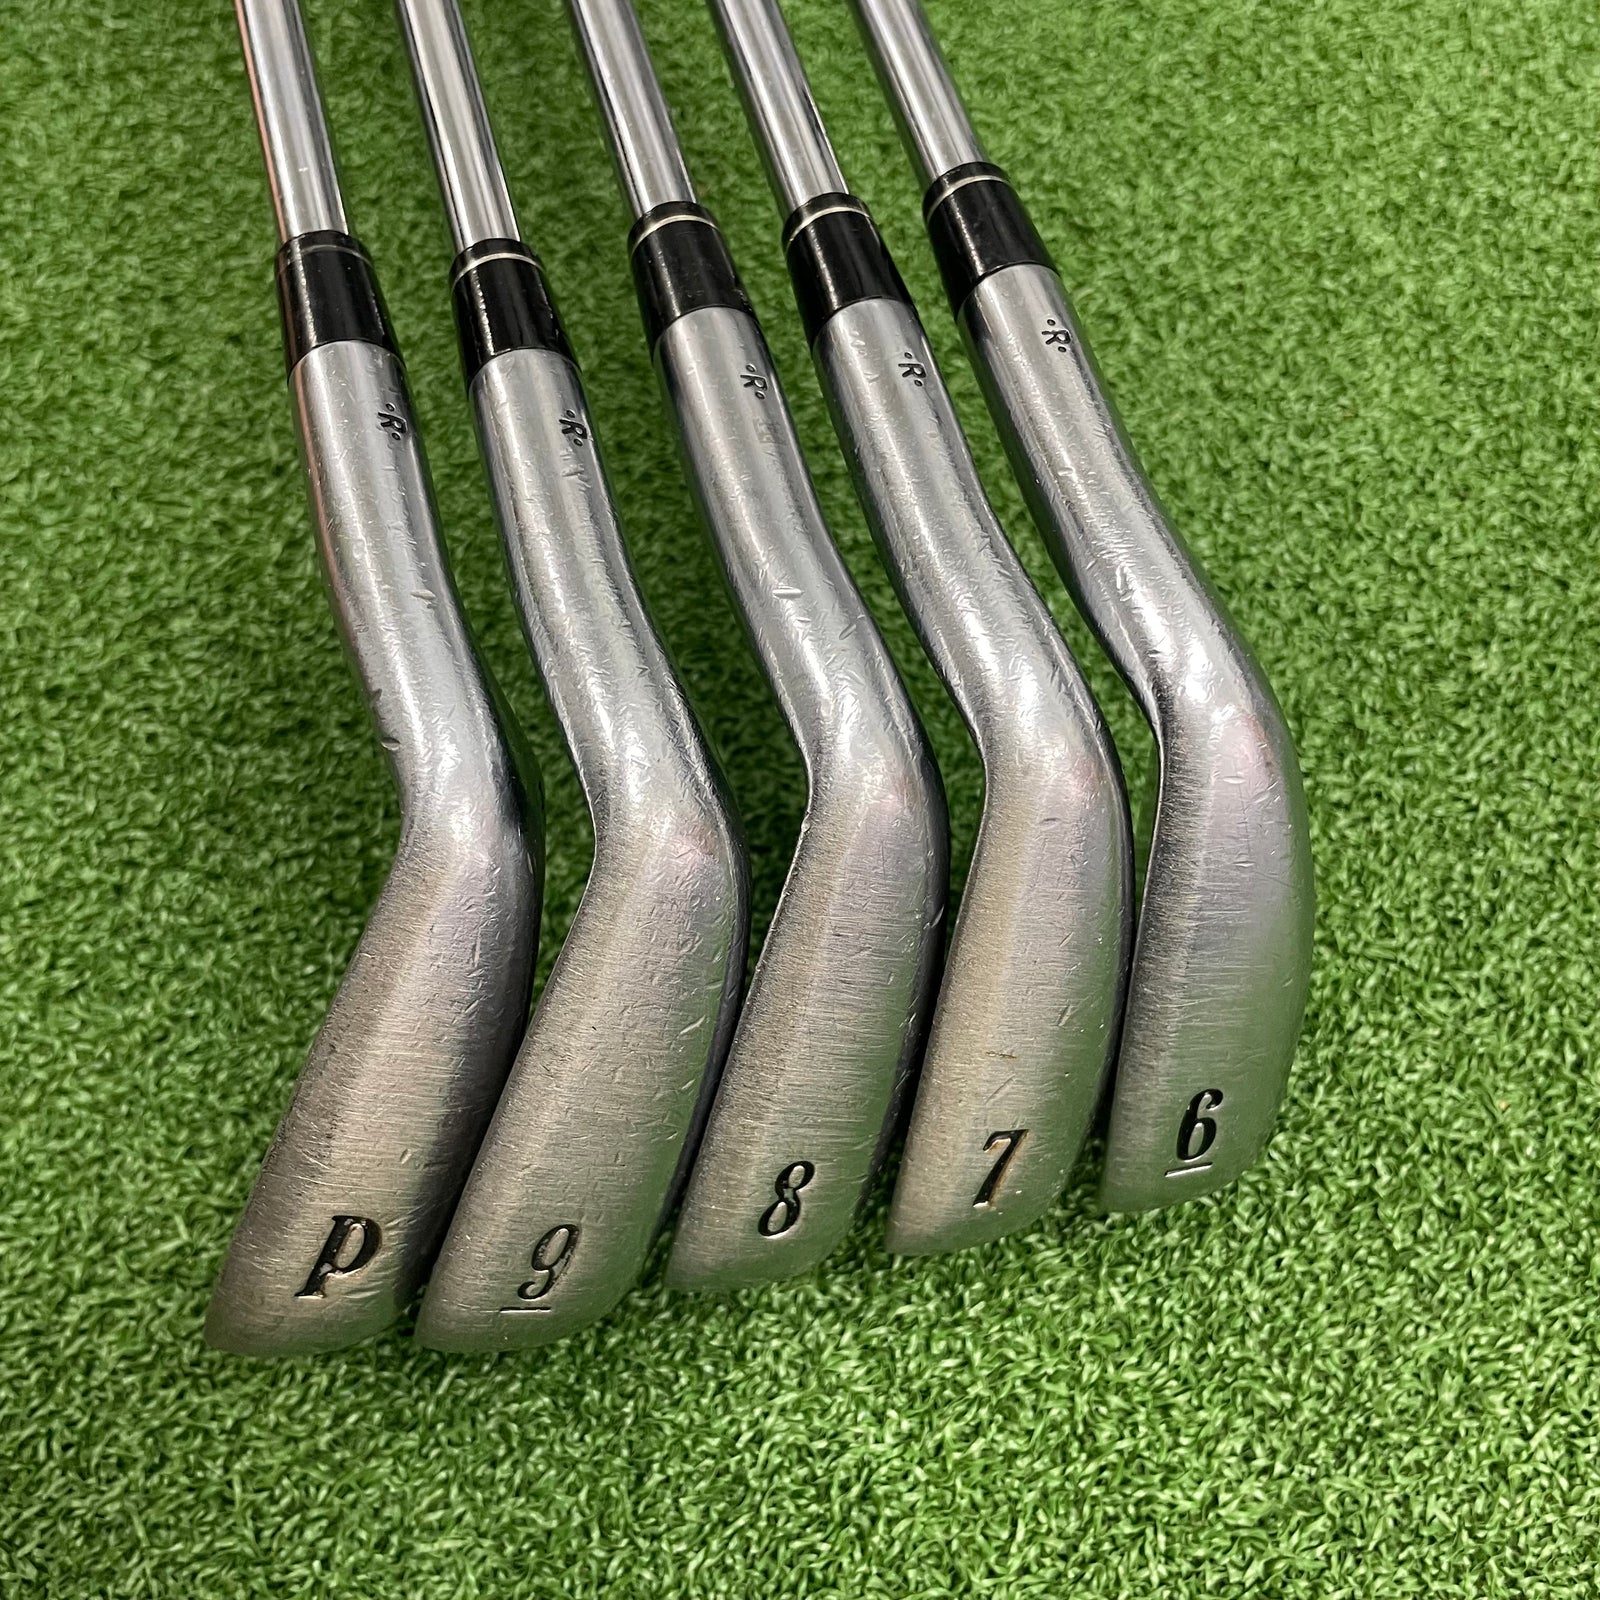 Callaway Legacy Forged IRON SET 5PC (6-P) STEEL SHAFTS  (S200),  #IS348